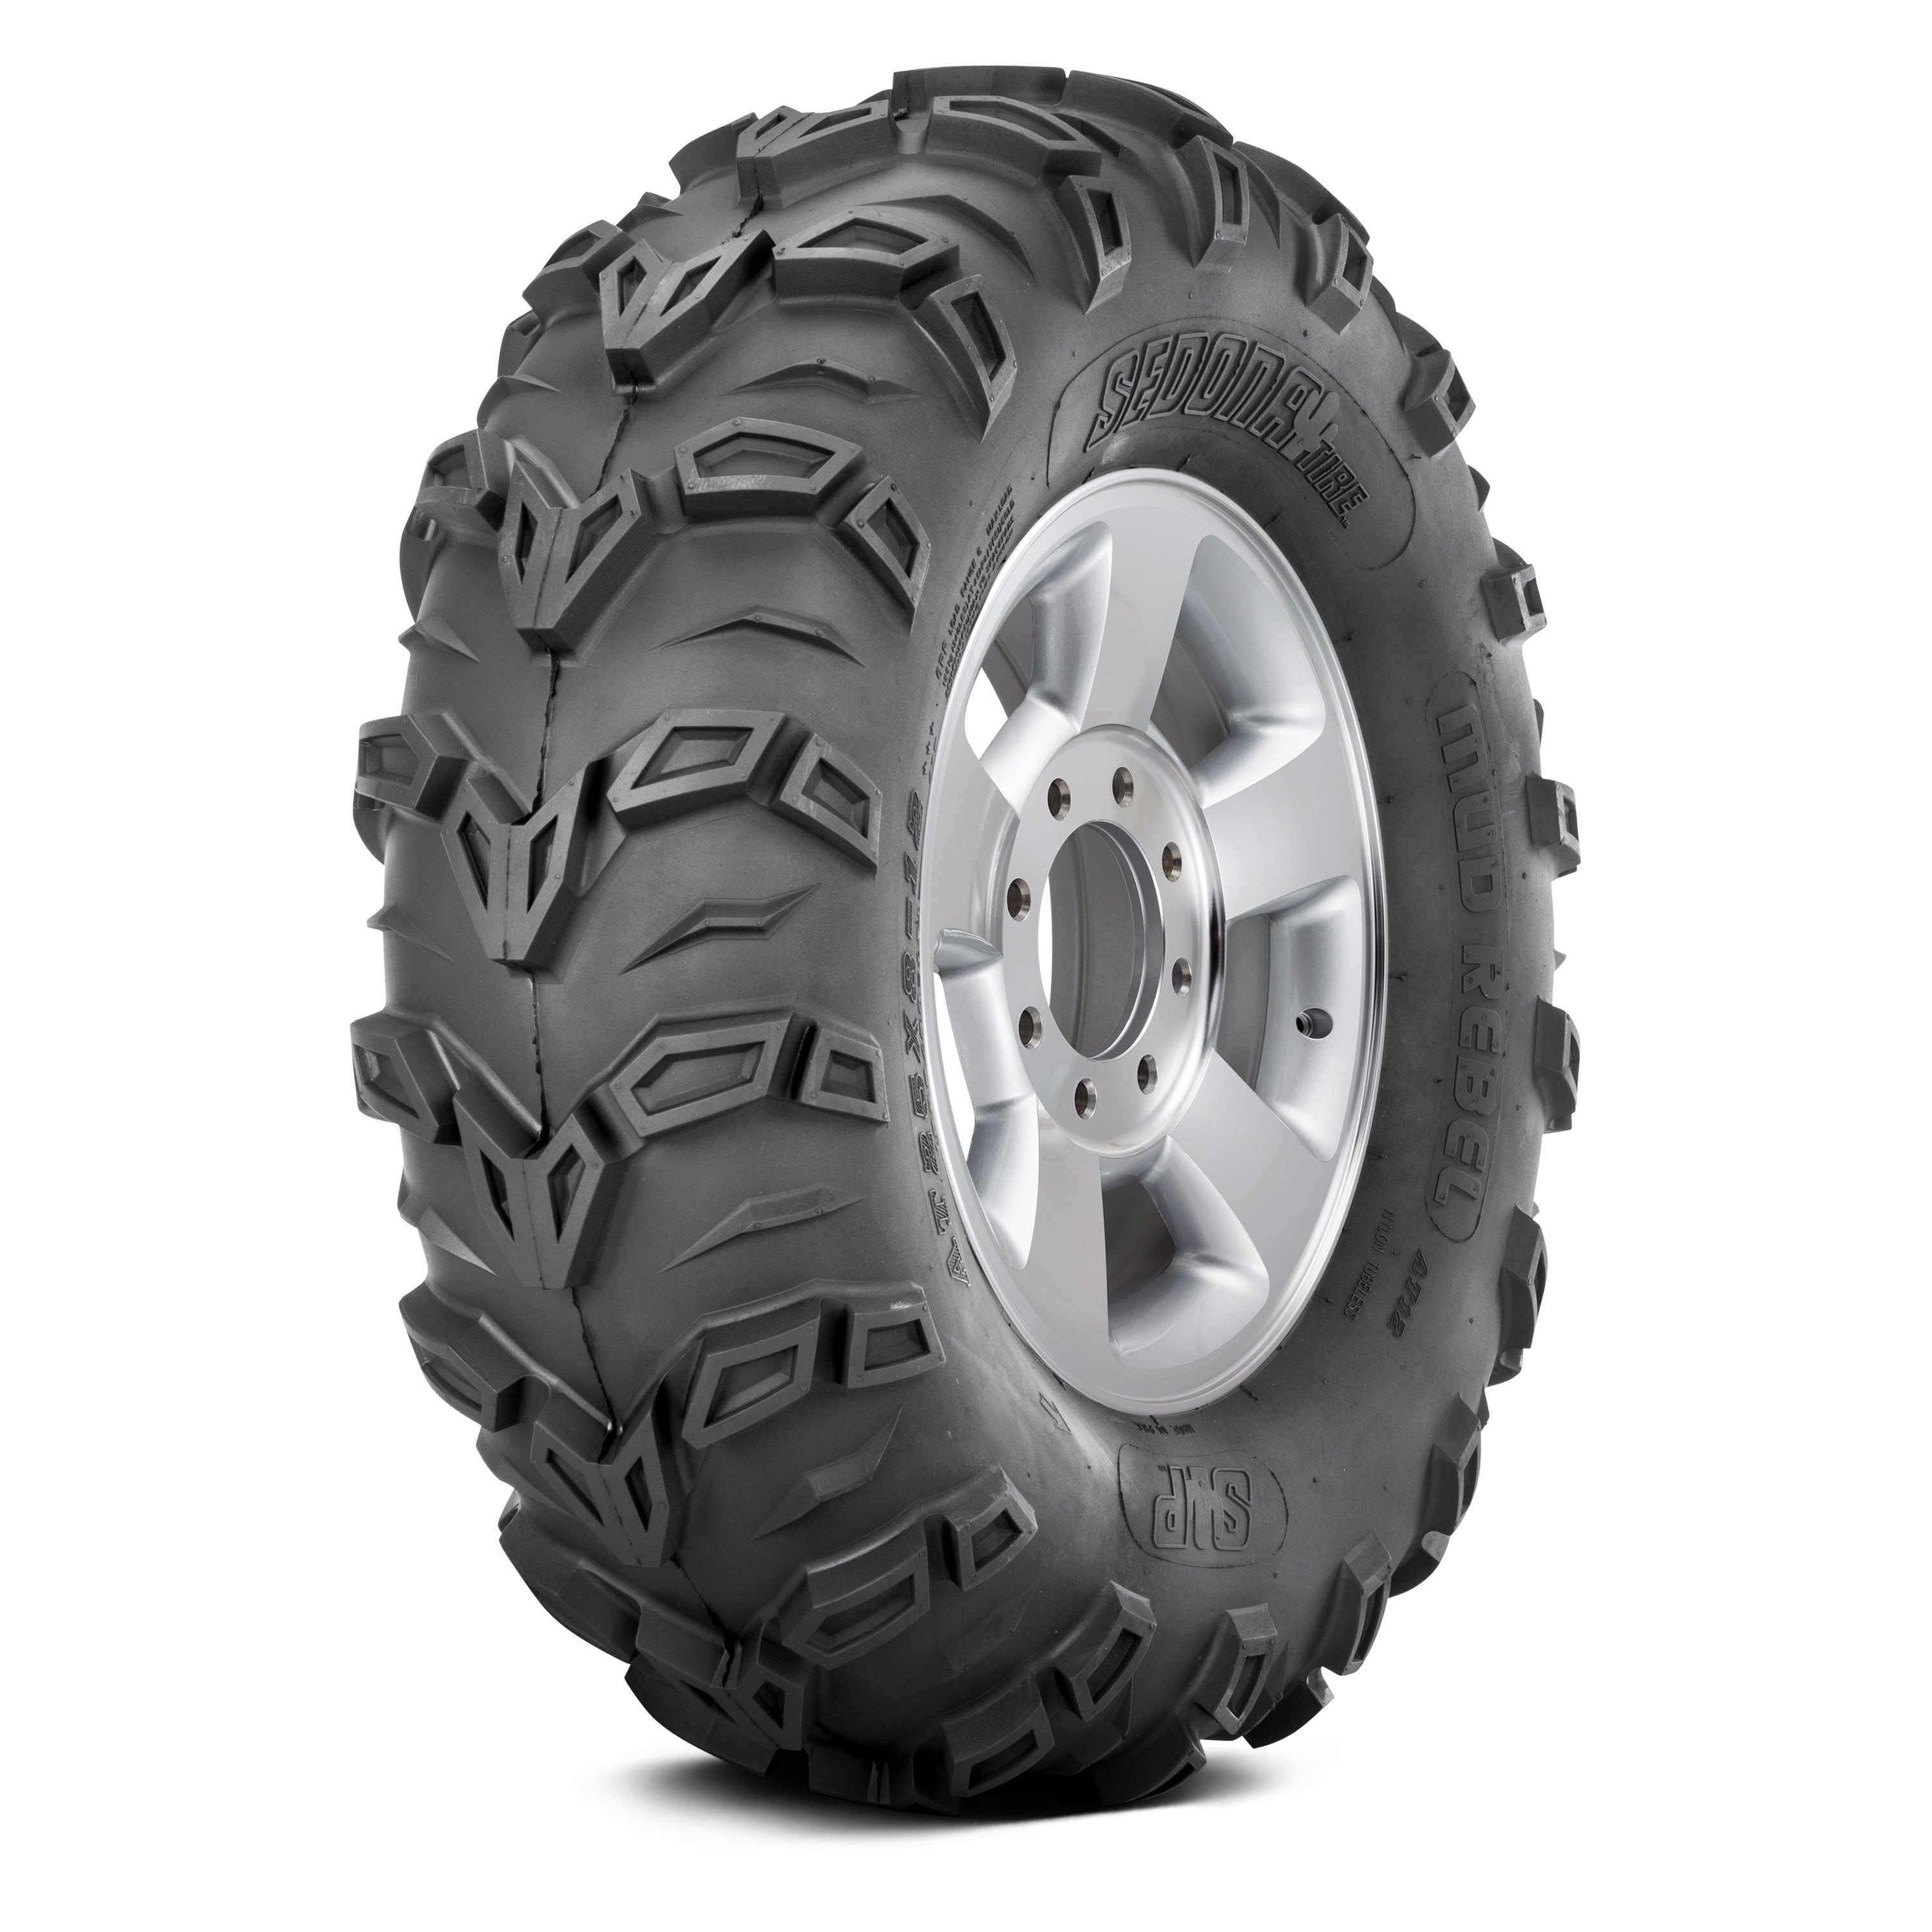 Sedona Mud Rebel 26x9-12 FRONT 6 Ply Bias Performance Tire for Can-Am Outlander